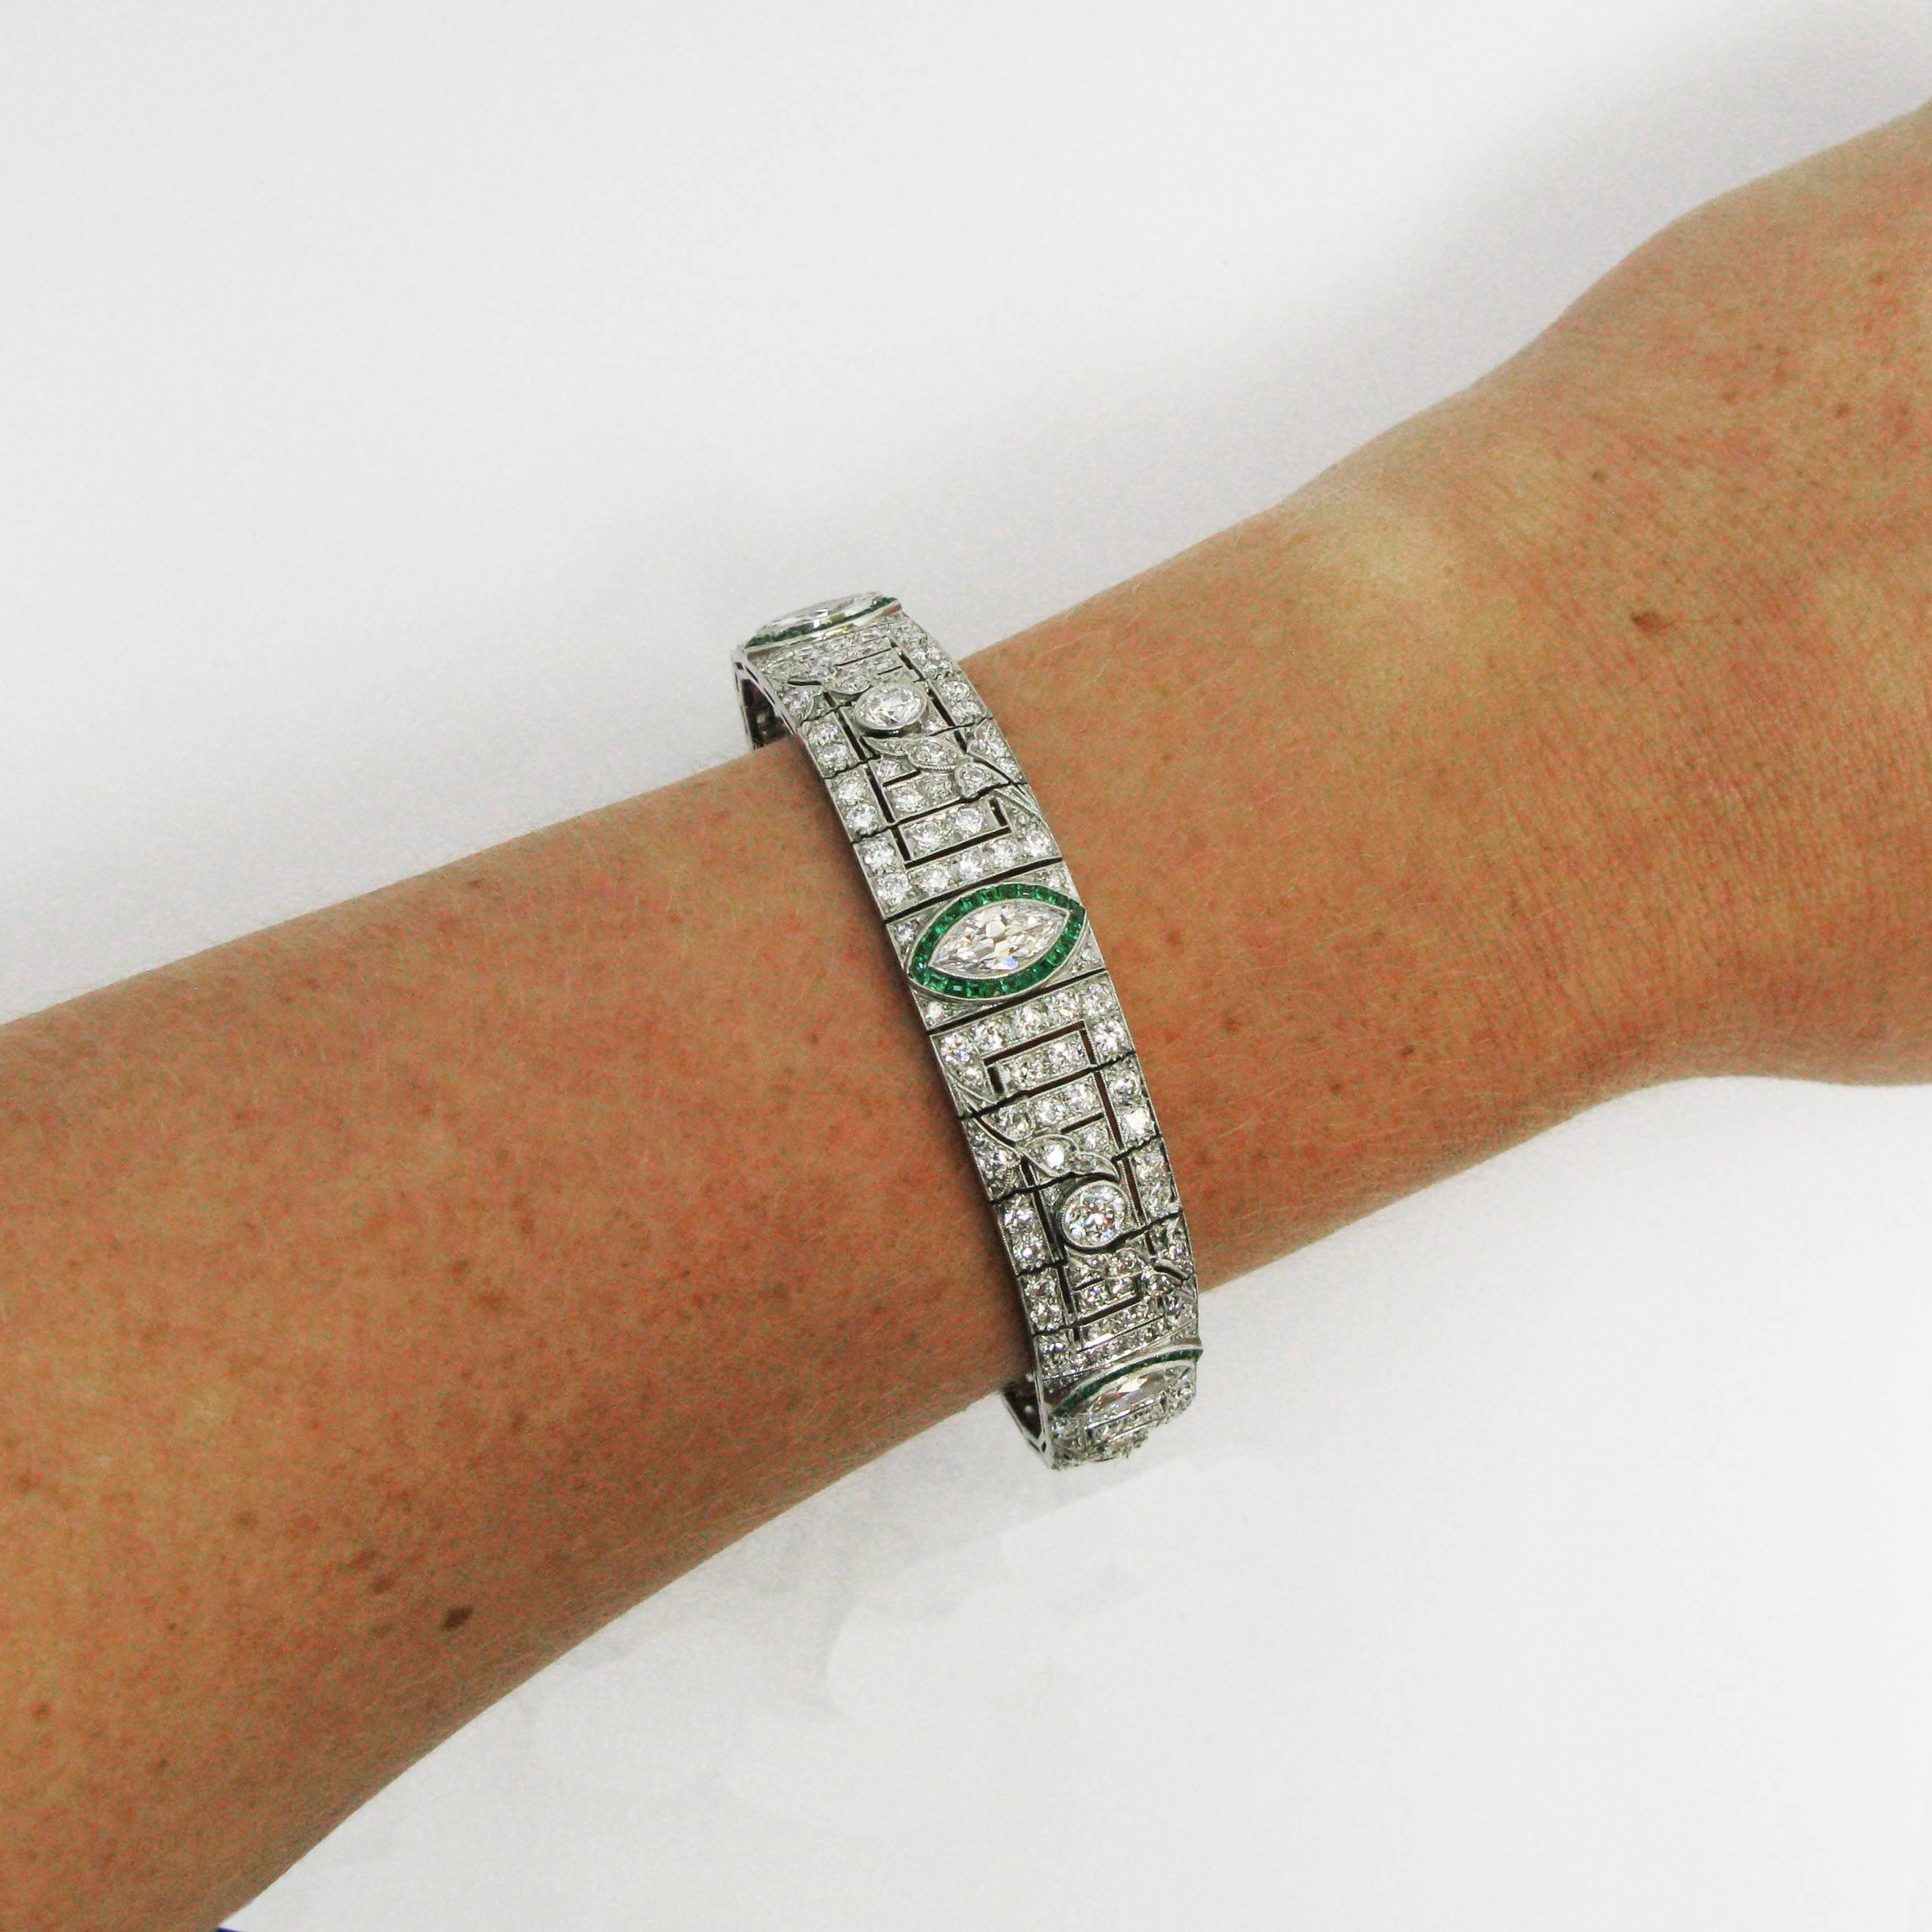 An elegant Art Deco platinum line bracelet features five graduated marquise-cut diamonds in square-cut emerald surrounds. Between each marquise diamond is a beautifully detailed, geometric plaque with a round-cut diamond bezel-set at the center of